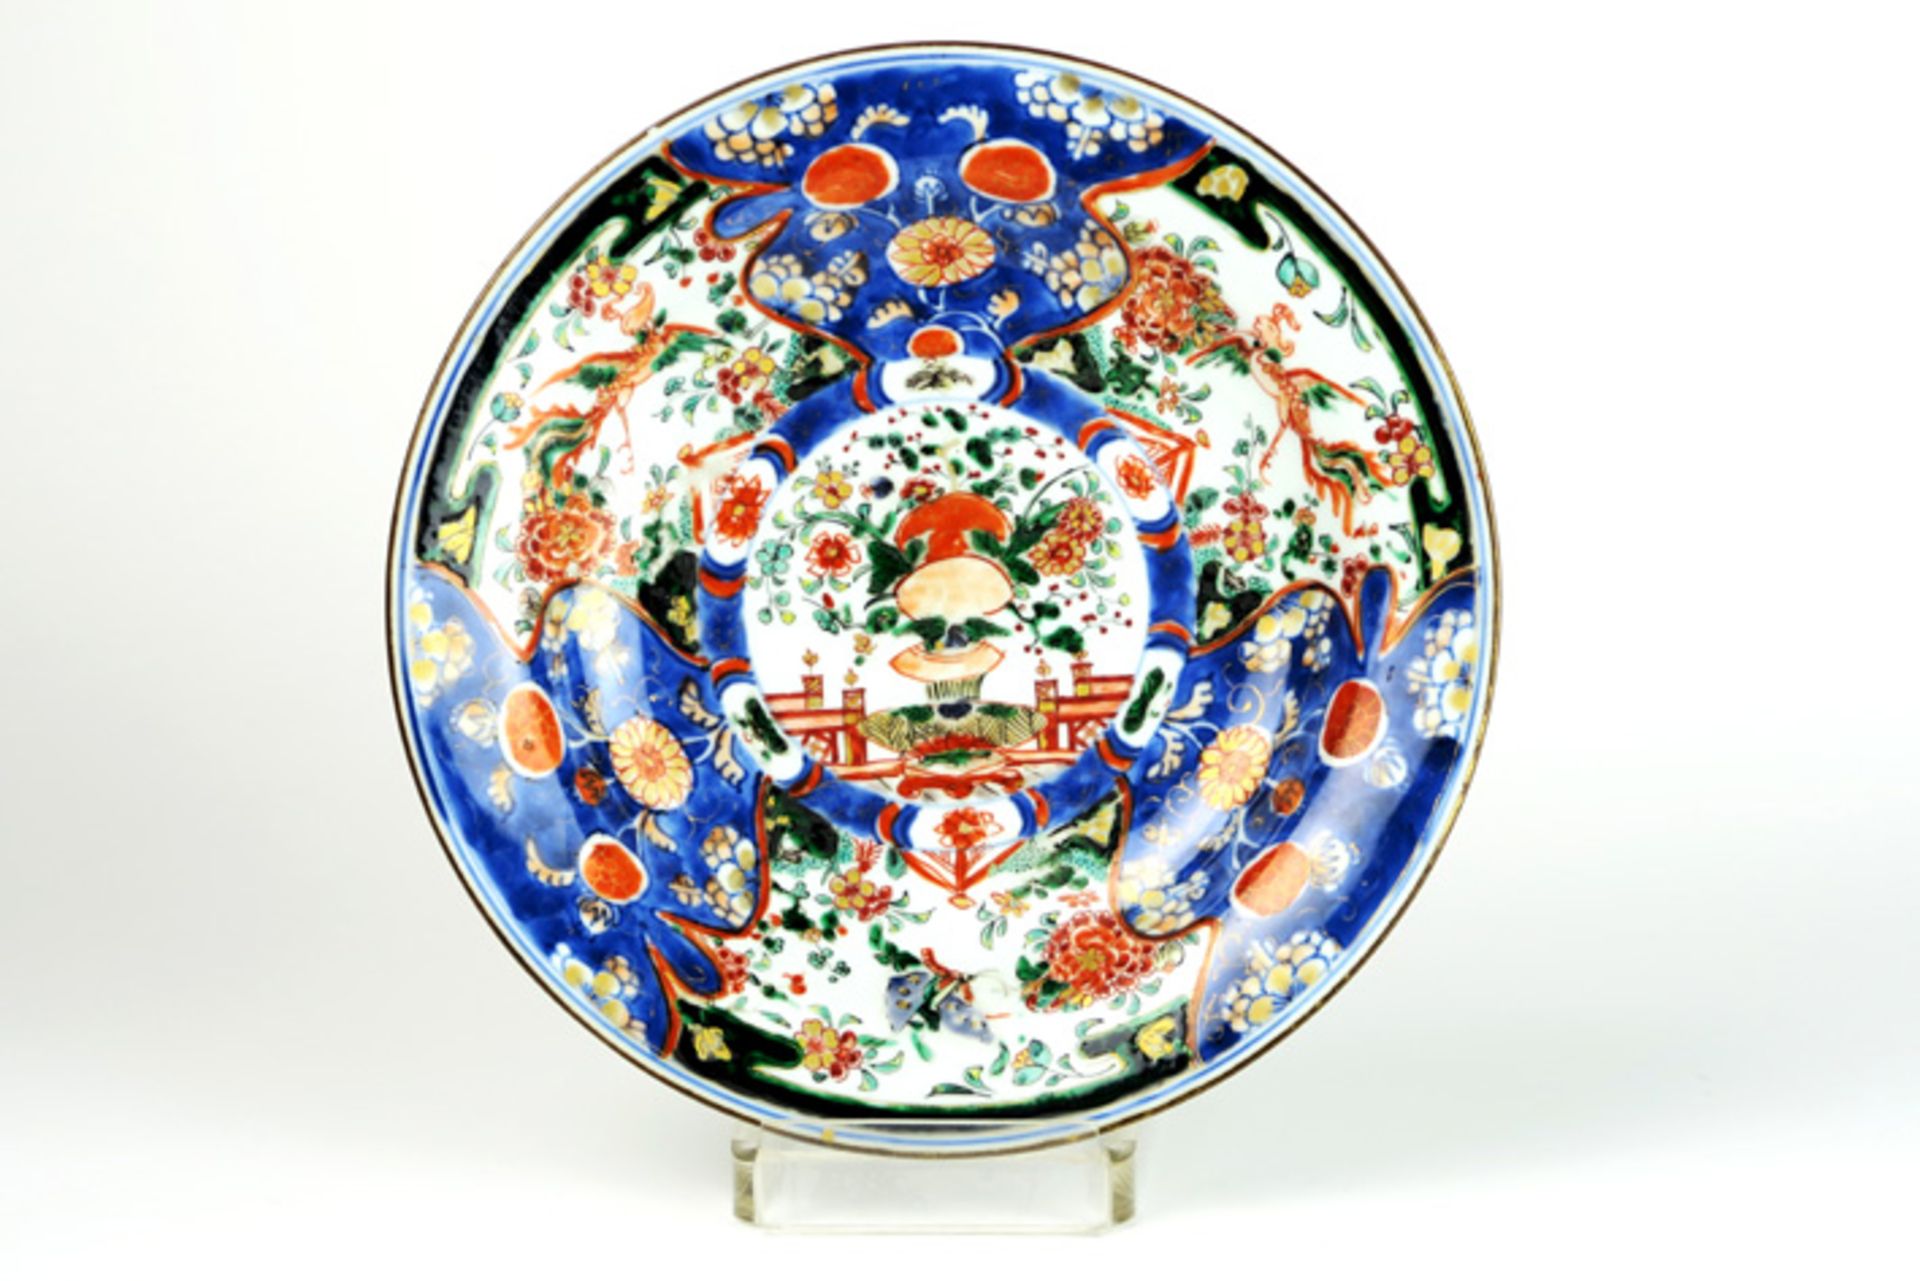 17th/18th Cent. Chinese dish in porcelain with Famille Verte decor with central medaillon with